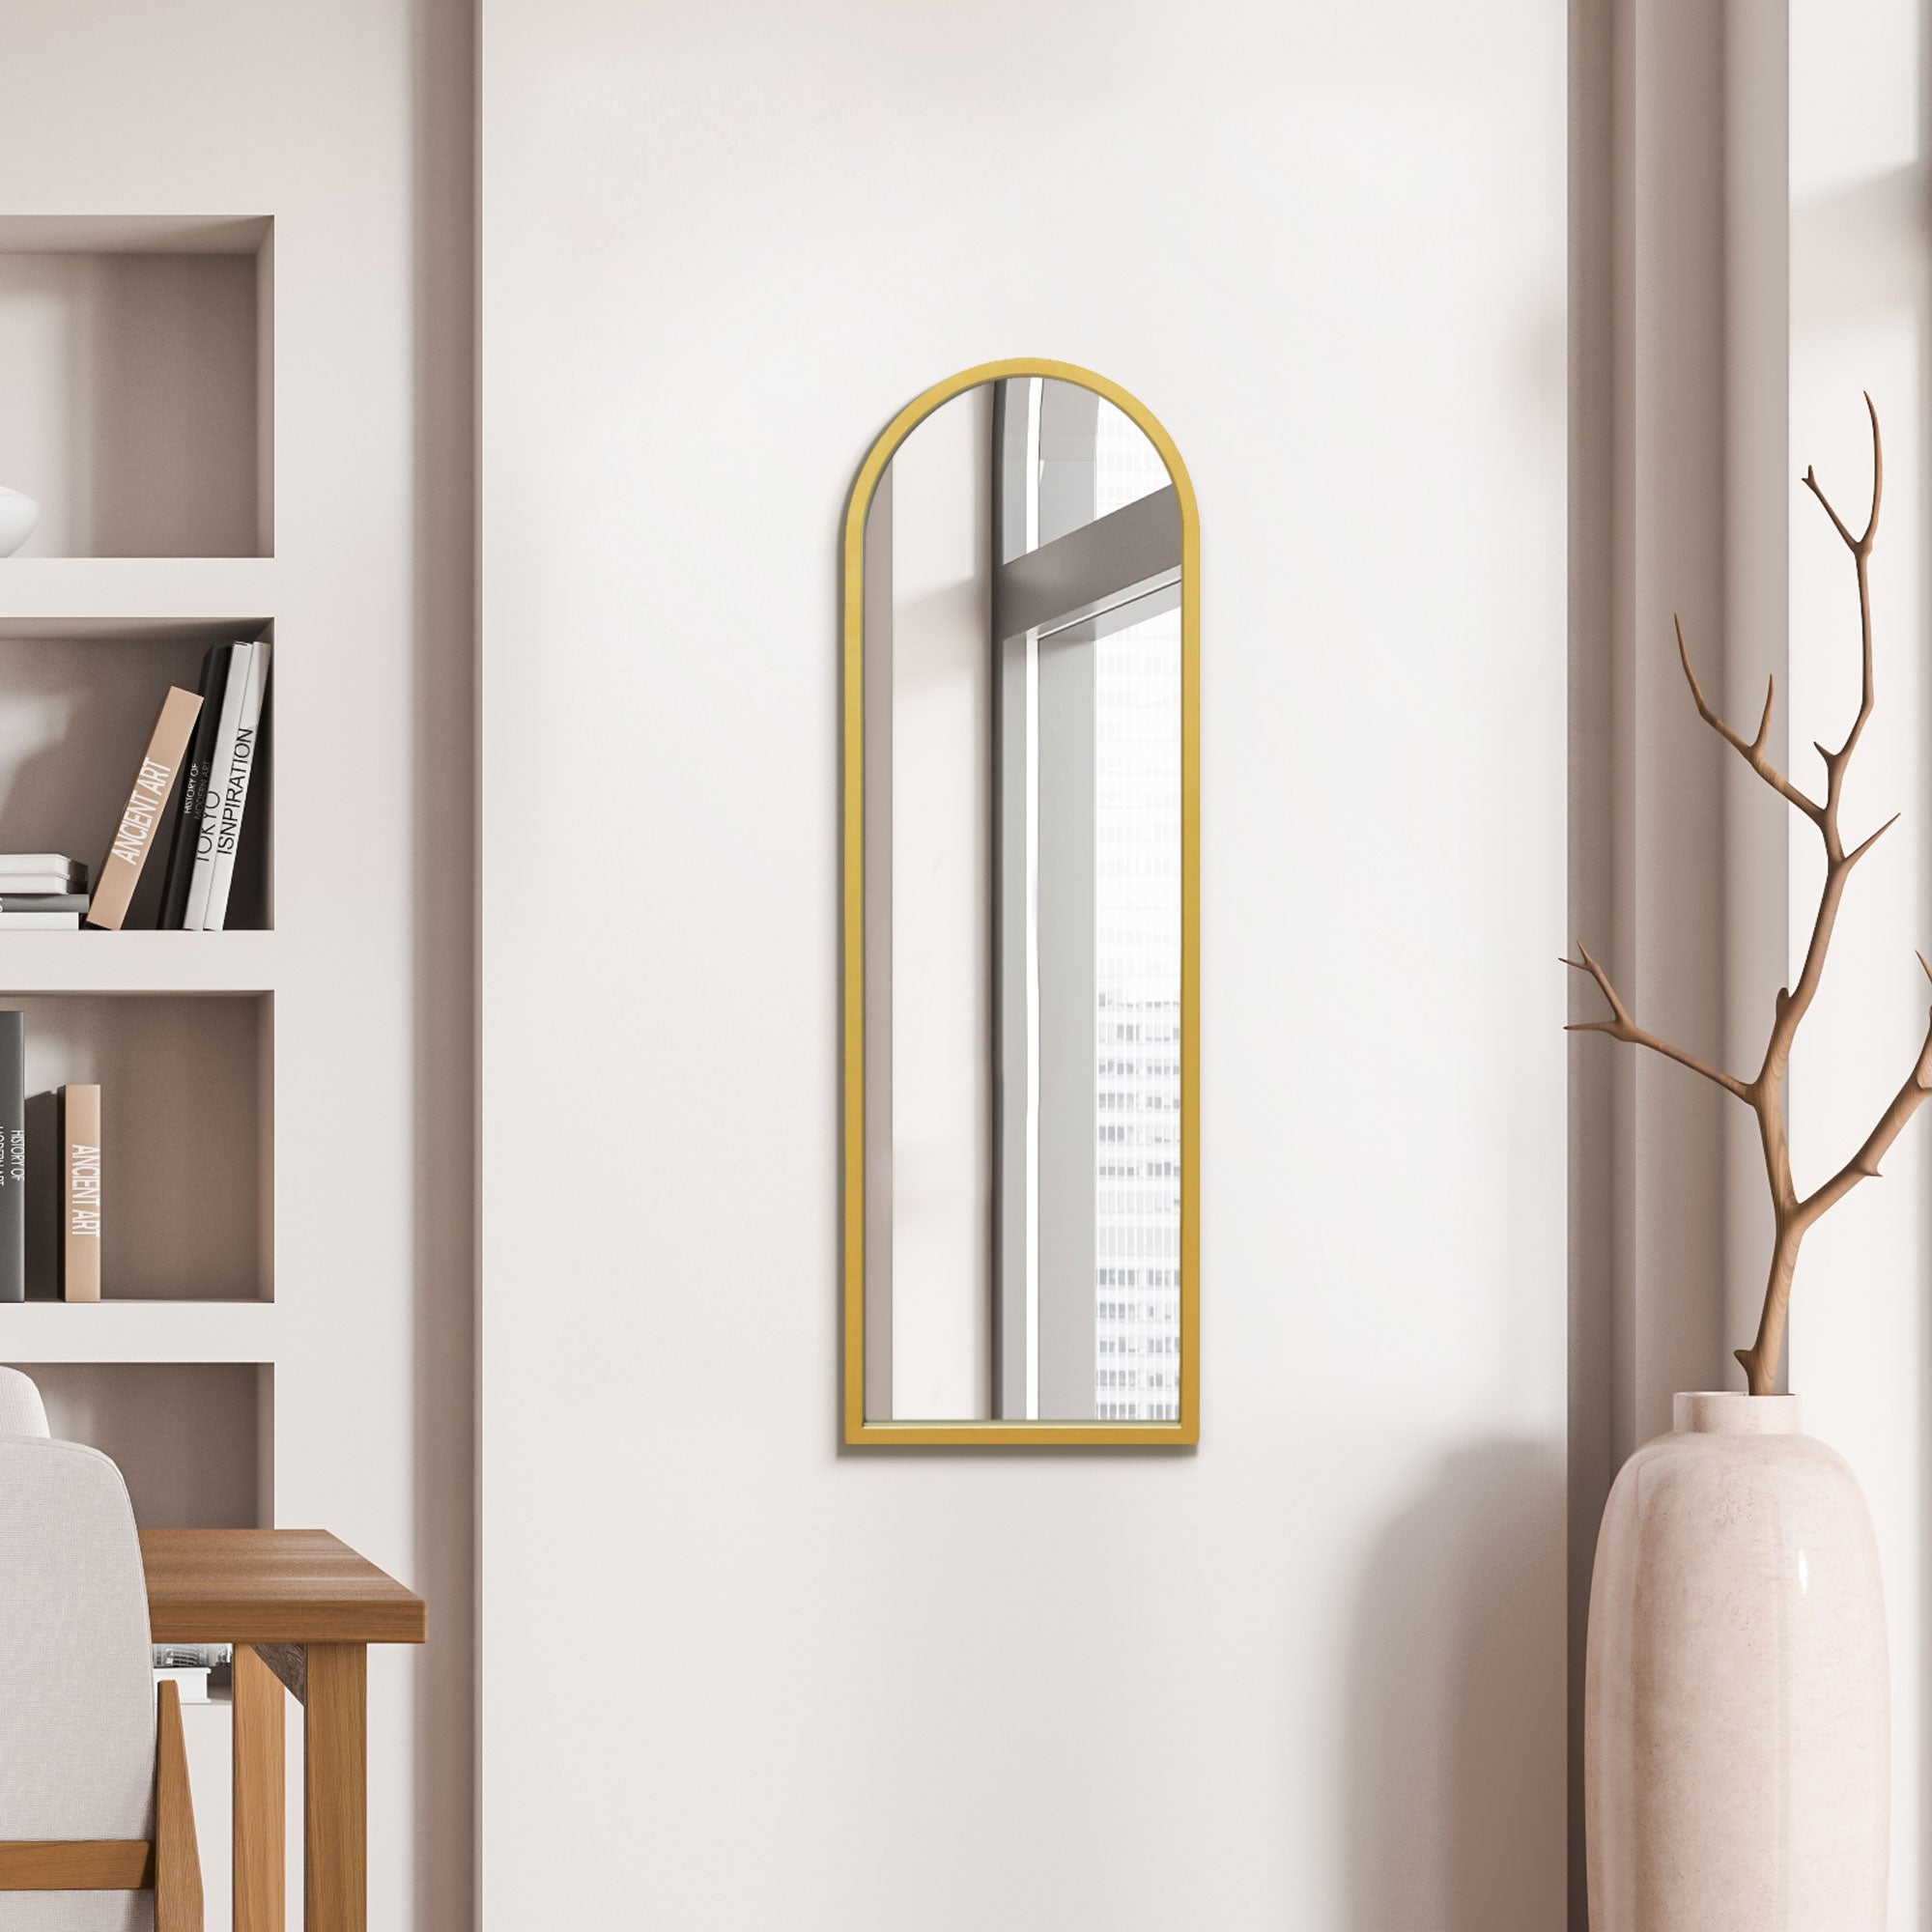 Arcus Slim Arched Full Length Wall Mirror